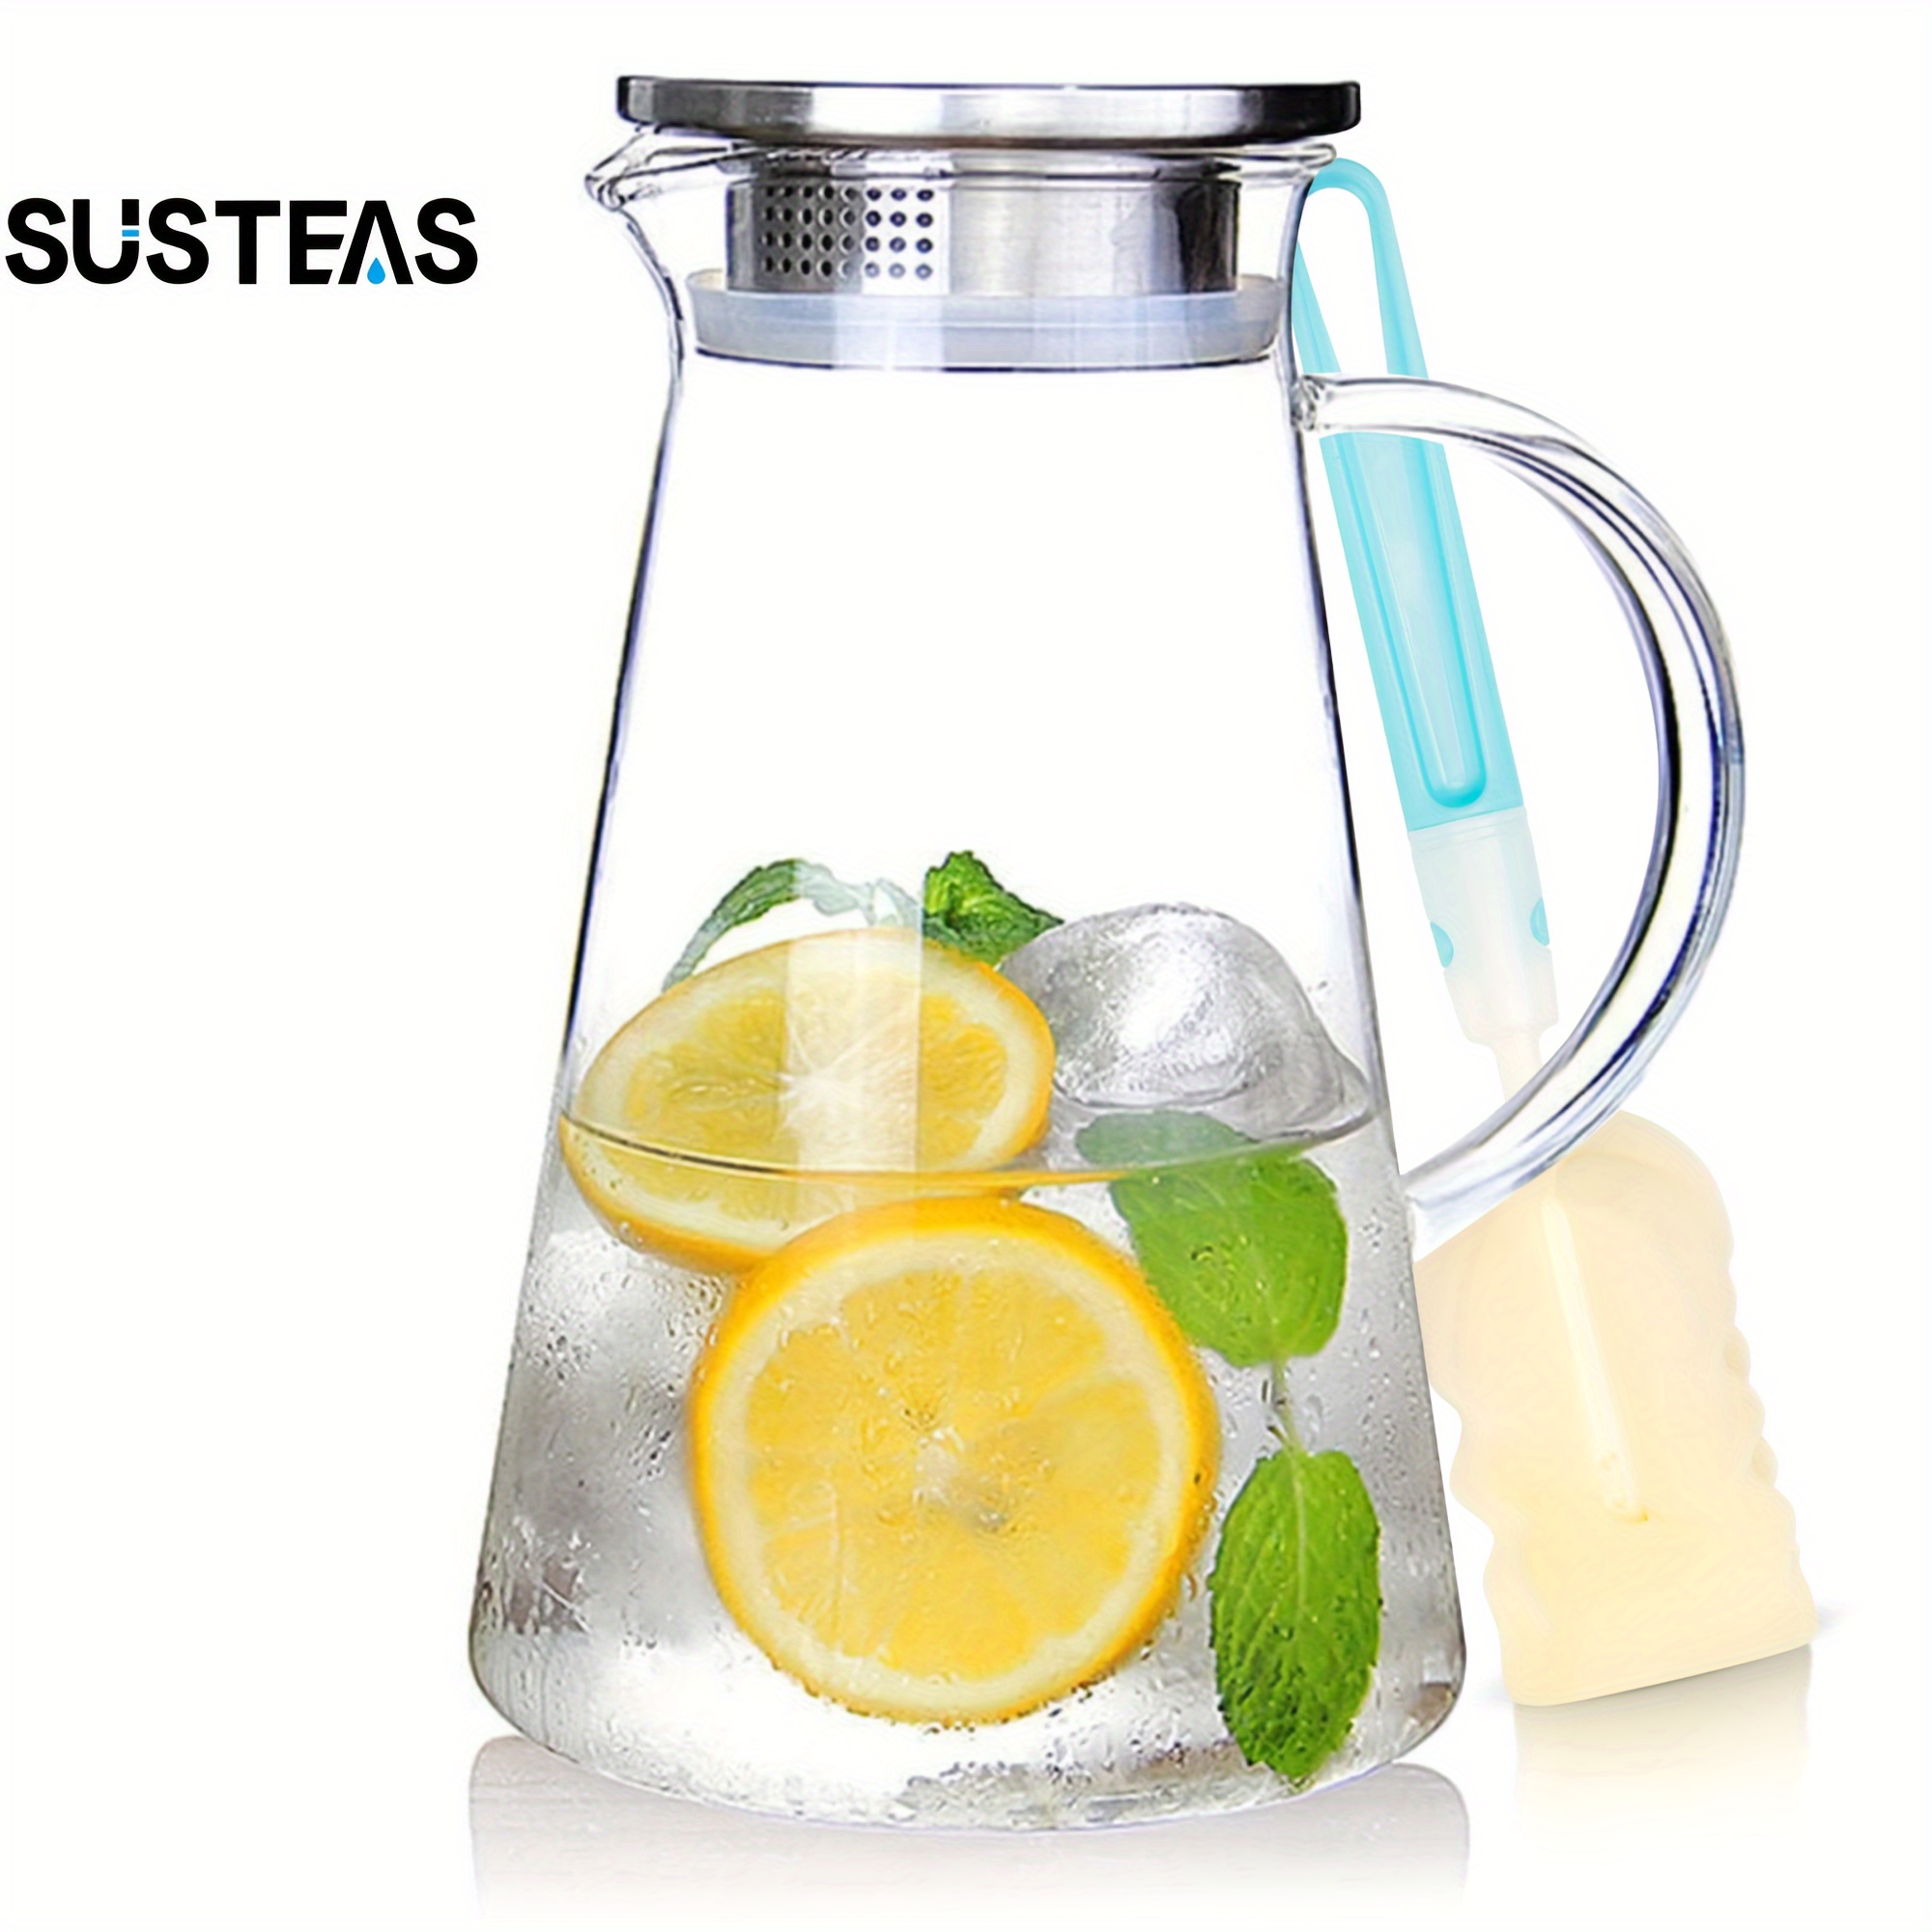 

Susteas 2.0 Liter 68oz Glass Pitcher With Lid, Easy Clean Heat Resistant Glass Water Carafe With Handle For Hot/cold Beverages - Water, Cold Brew, Iced Tea & Juice, 1 Free Long-handled Brush Included